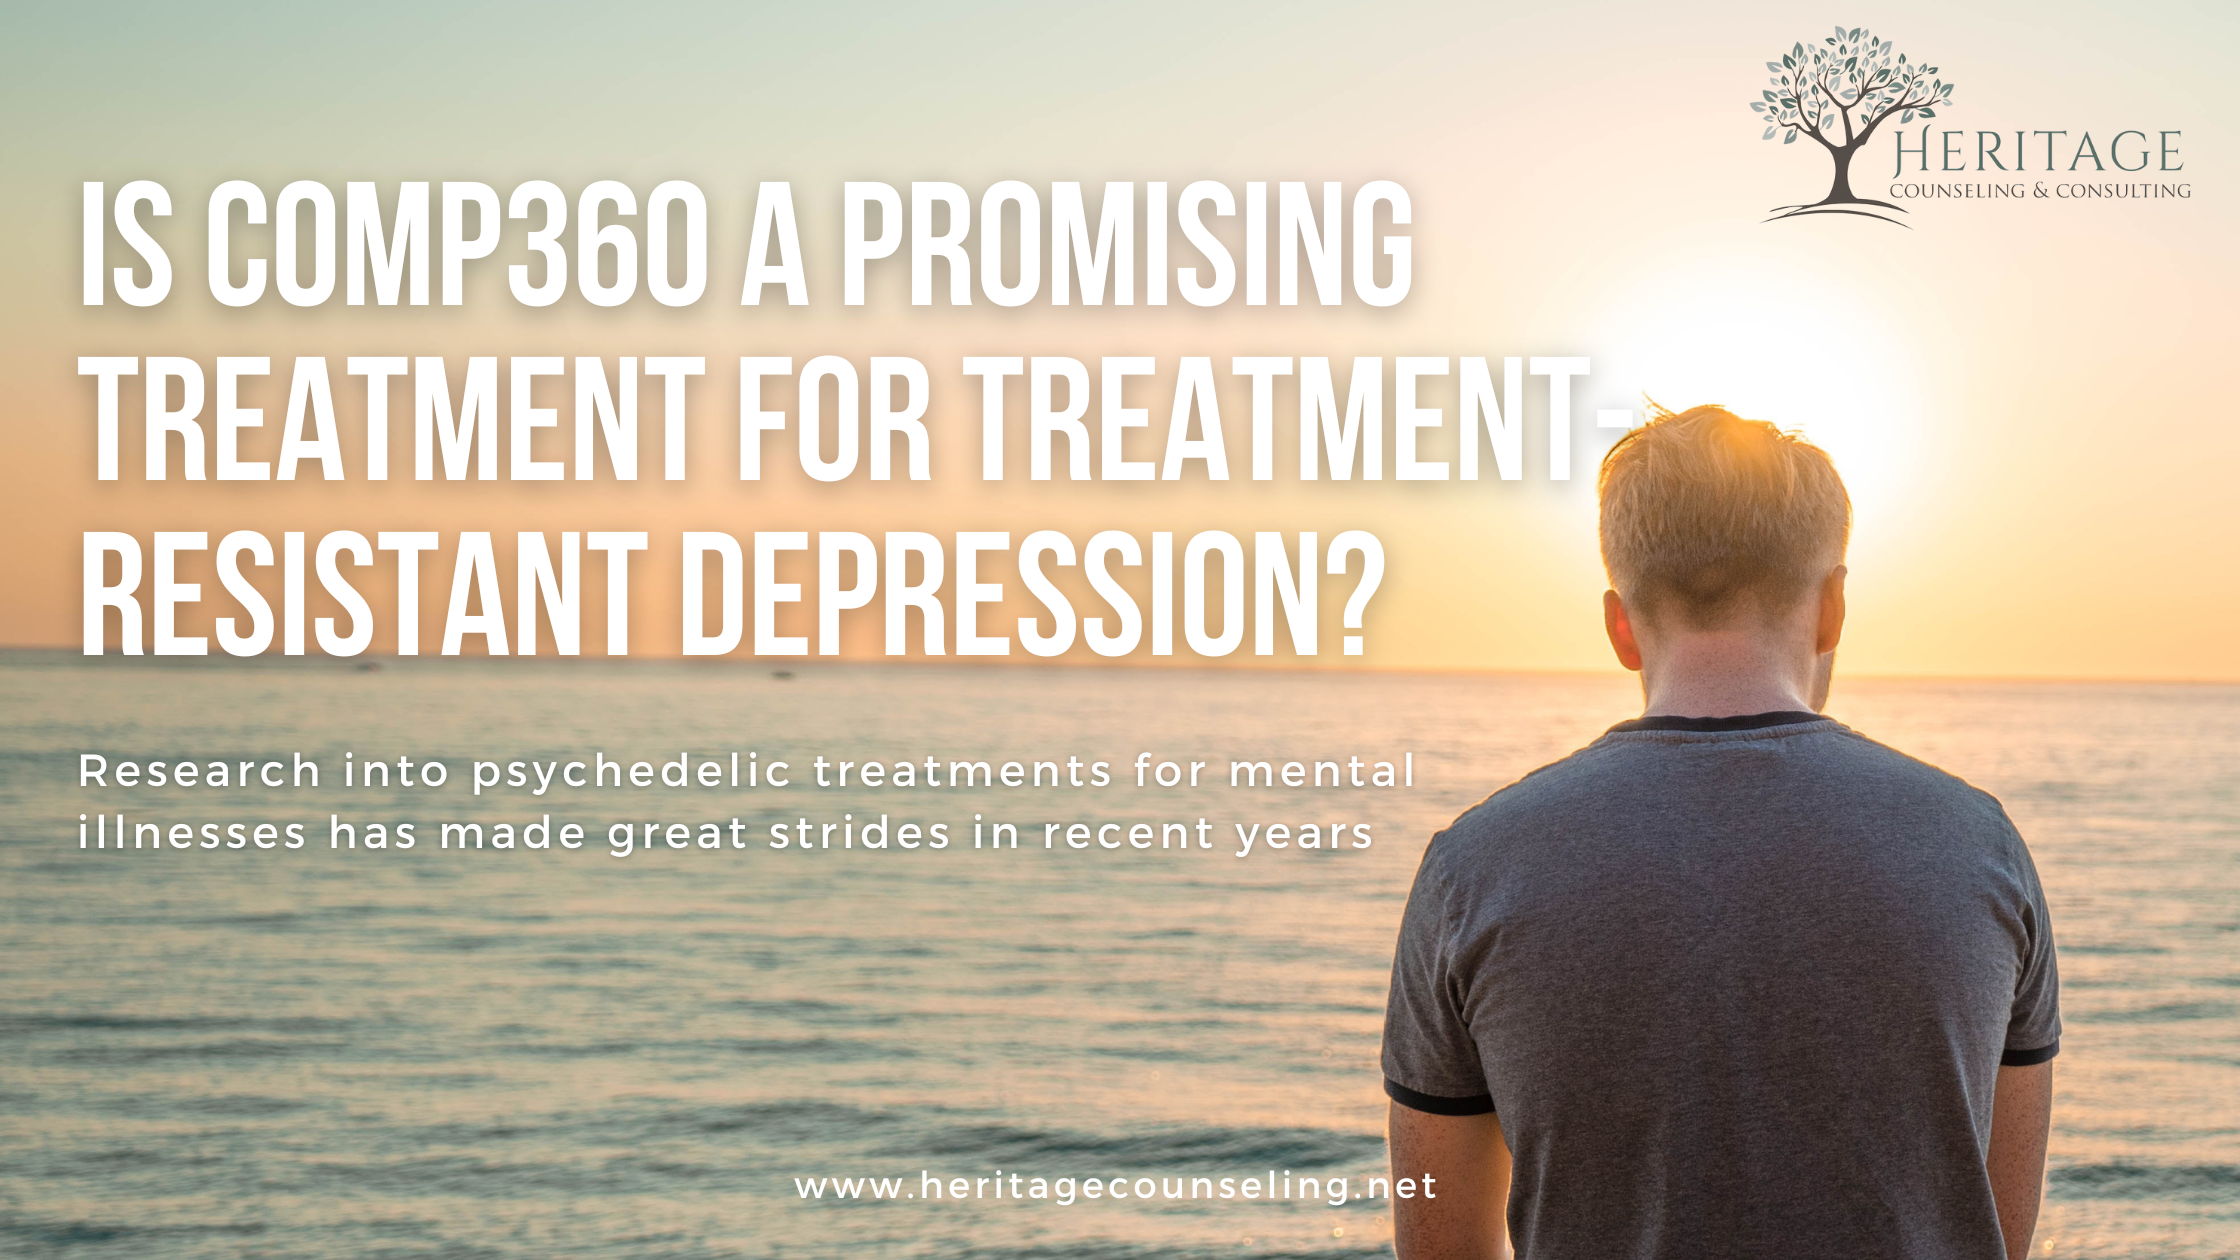 Is COMP360 a Promising Treatment for Treatment-Resistant Depression?